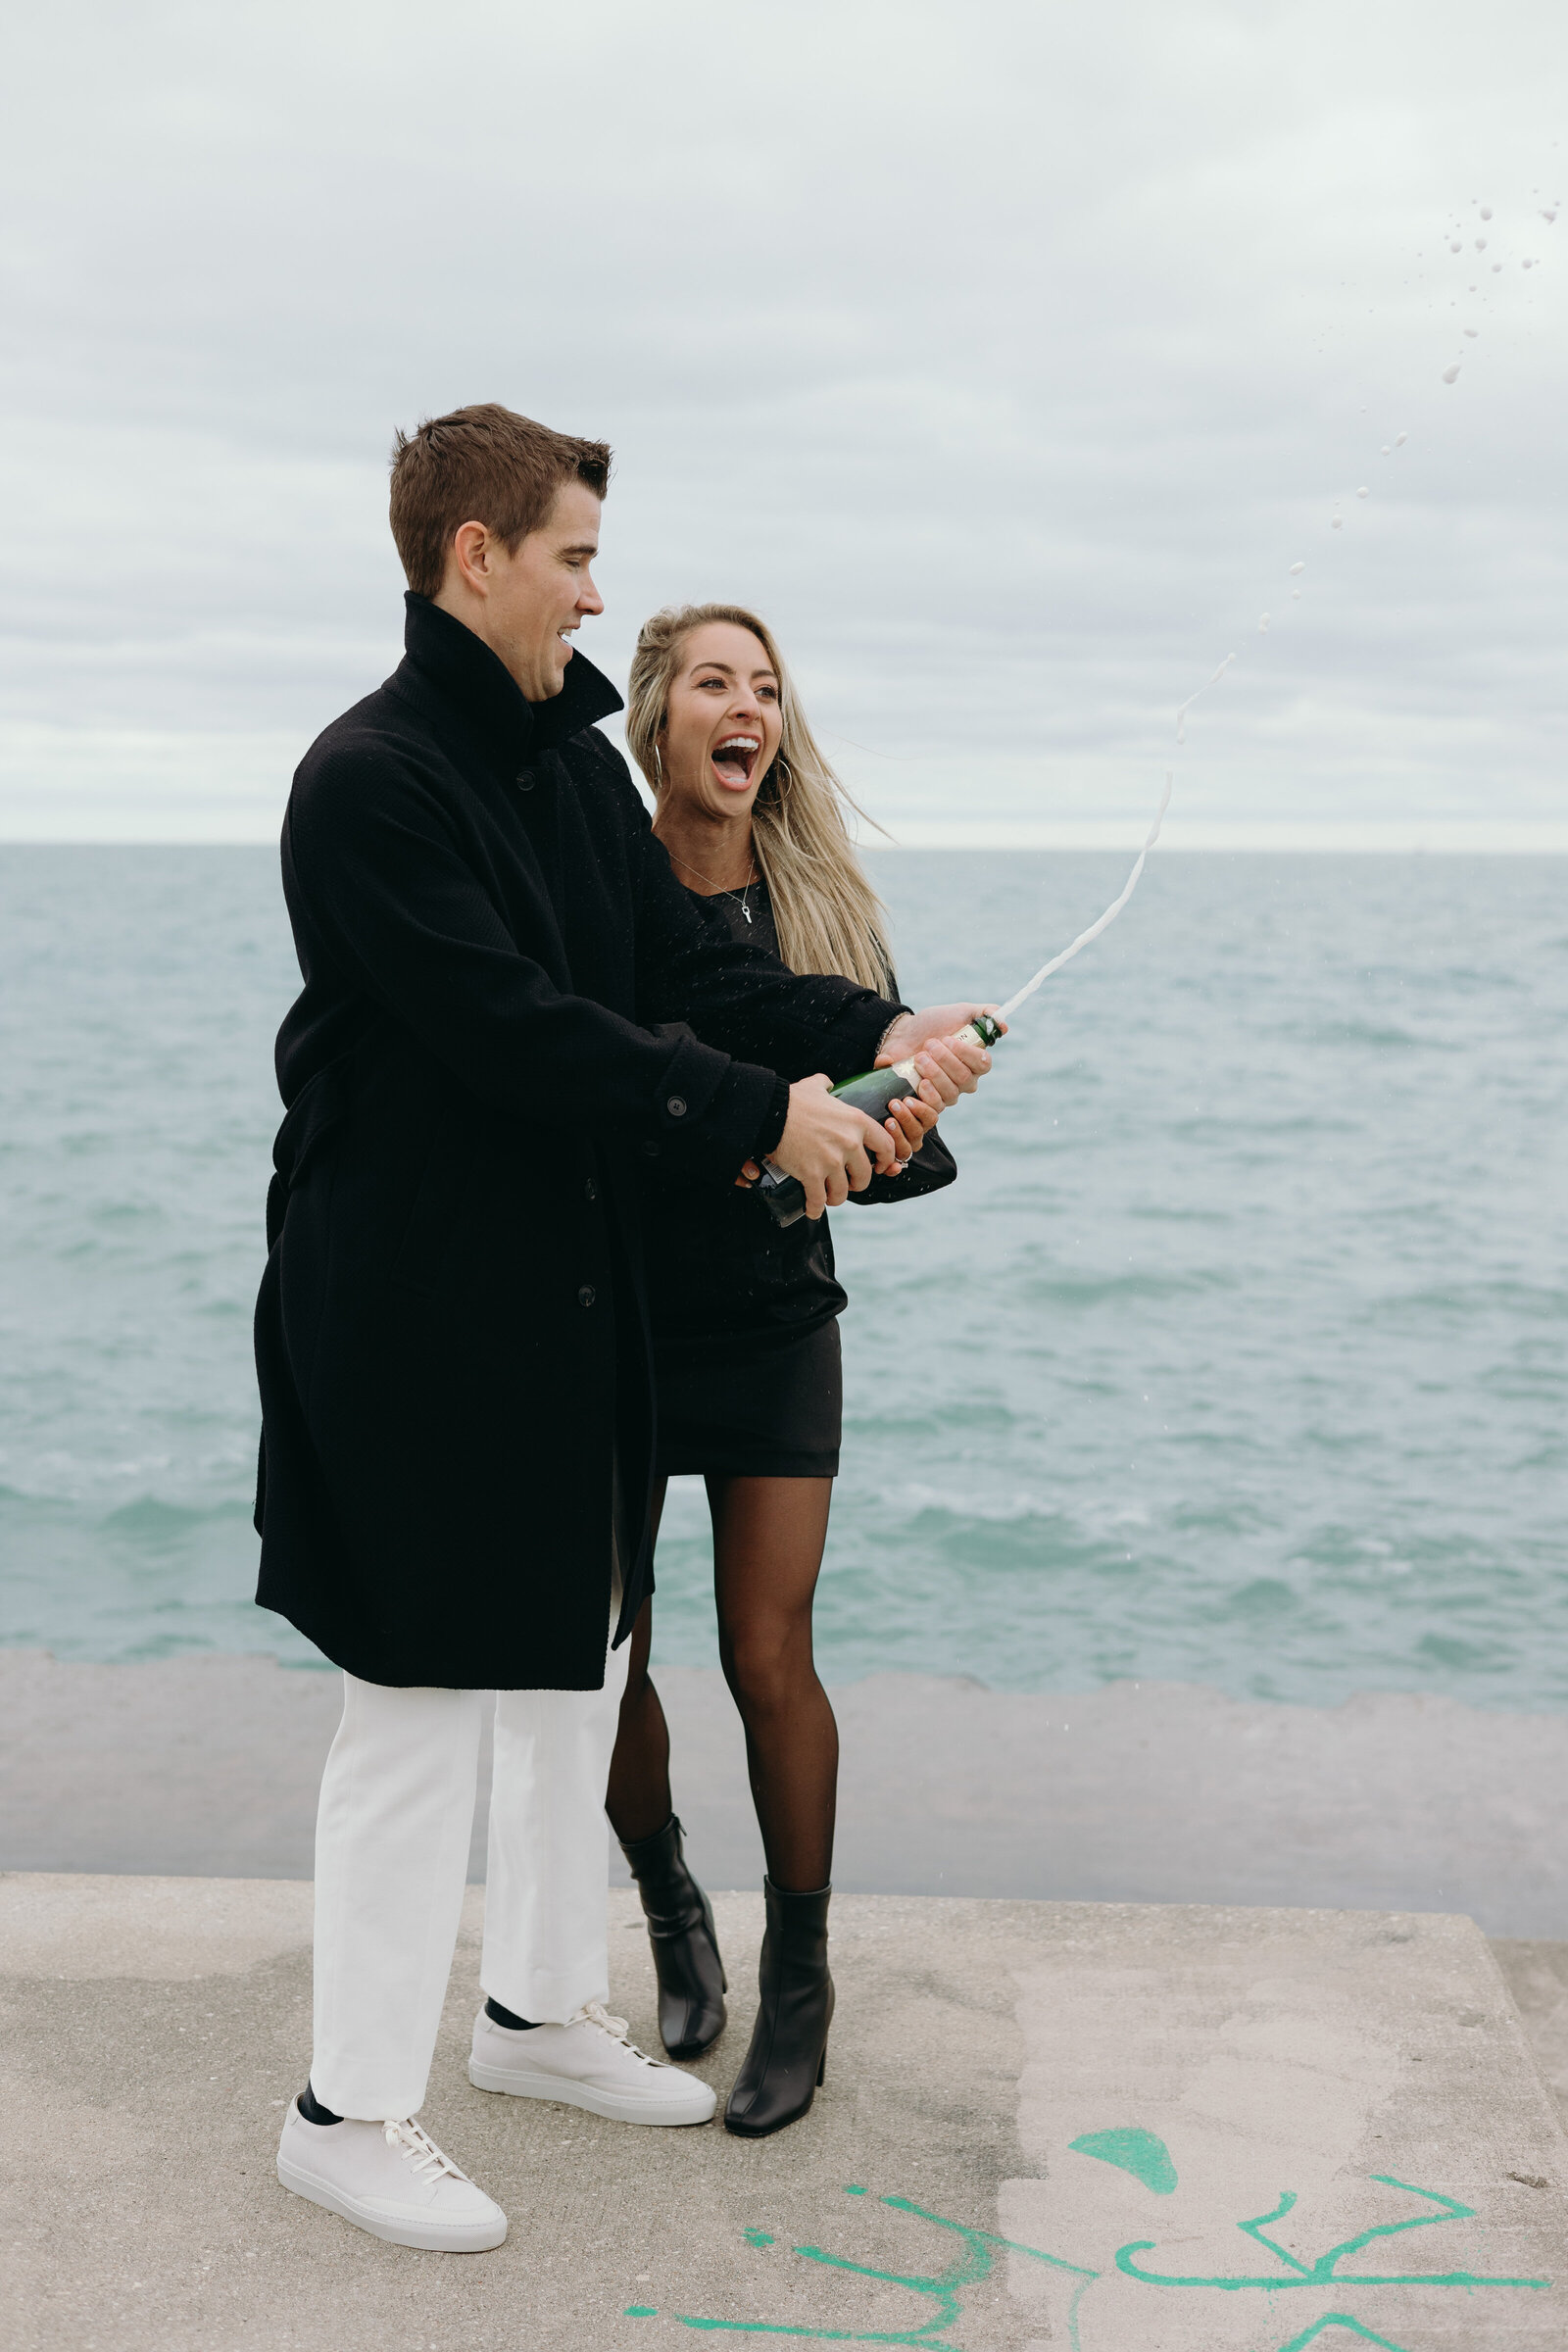 Z Photo and Film - Cody and Silvana's Chicago Engagement Shoot - Chicago, Illinois-12